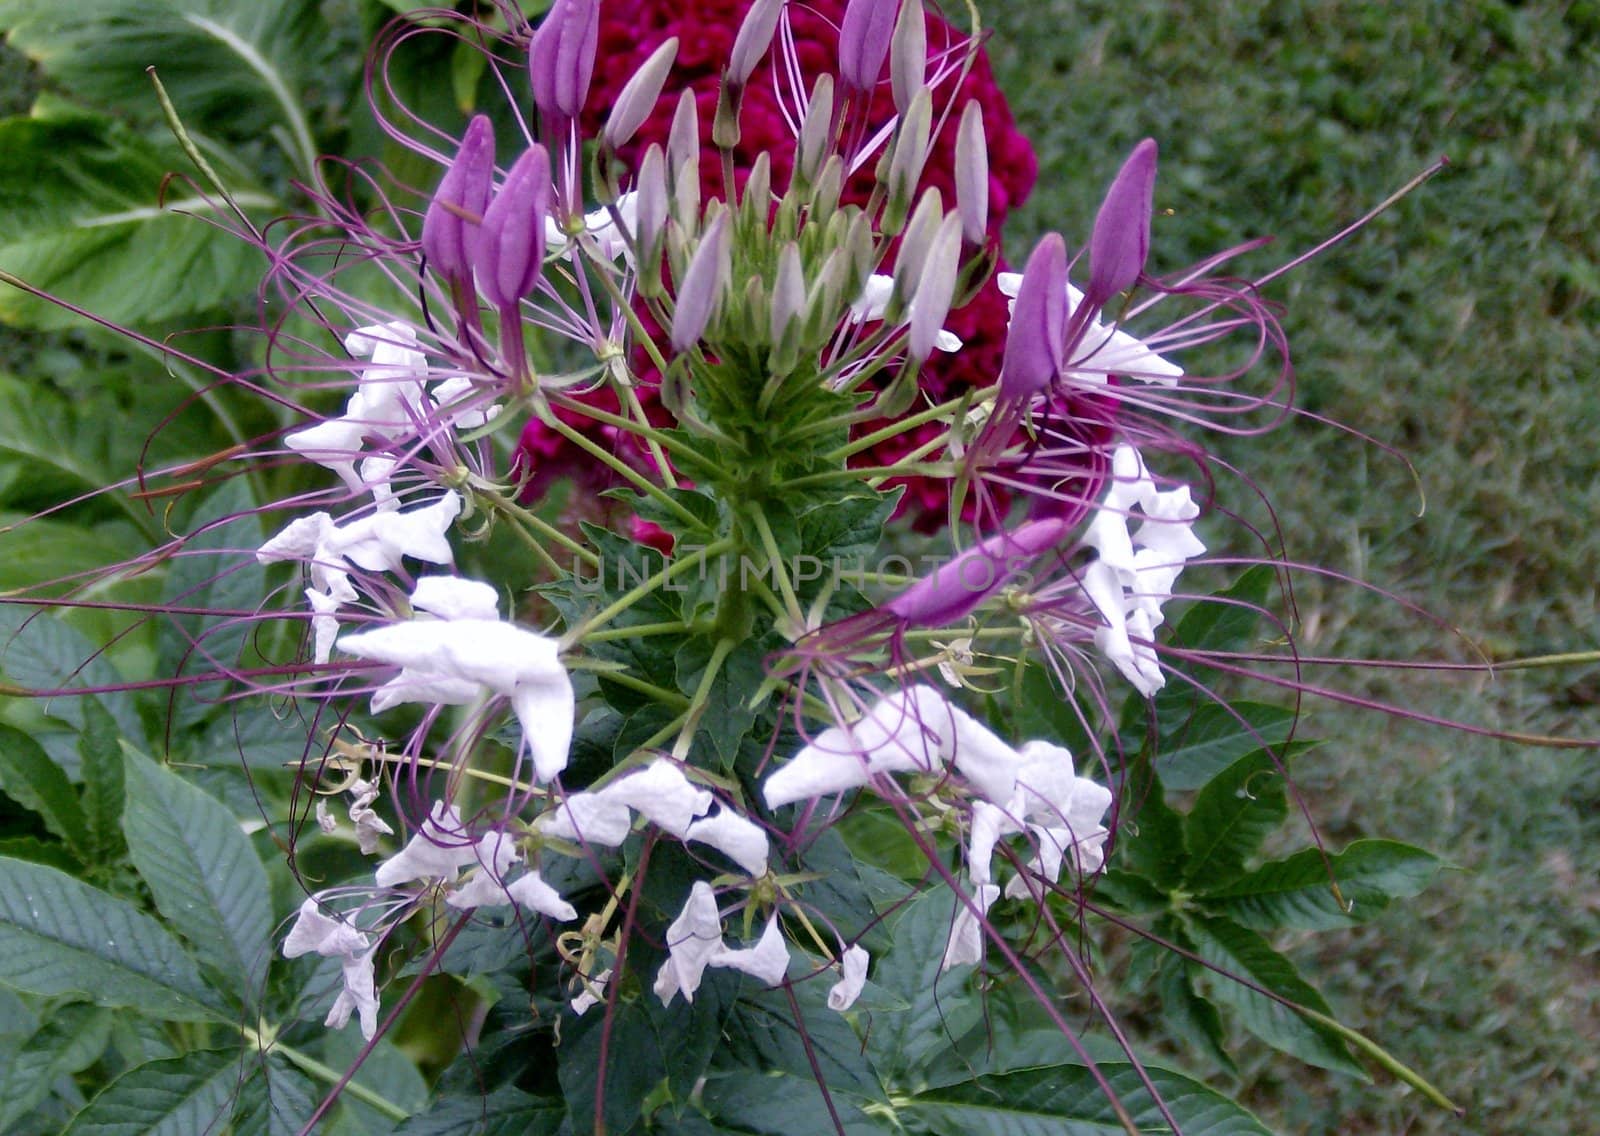 Pink and White Cleome by xplorer1959@hotmail.com